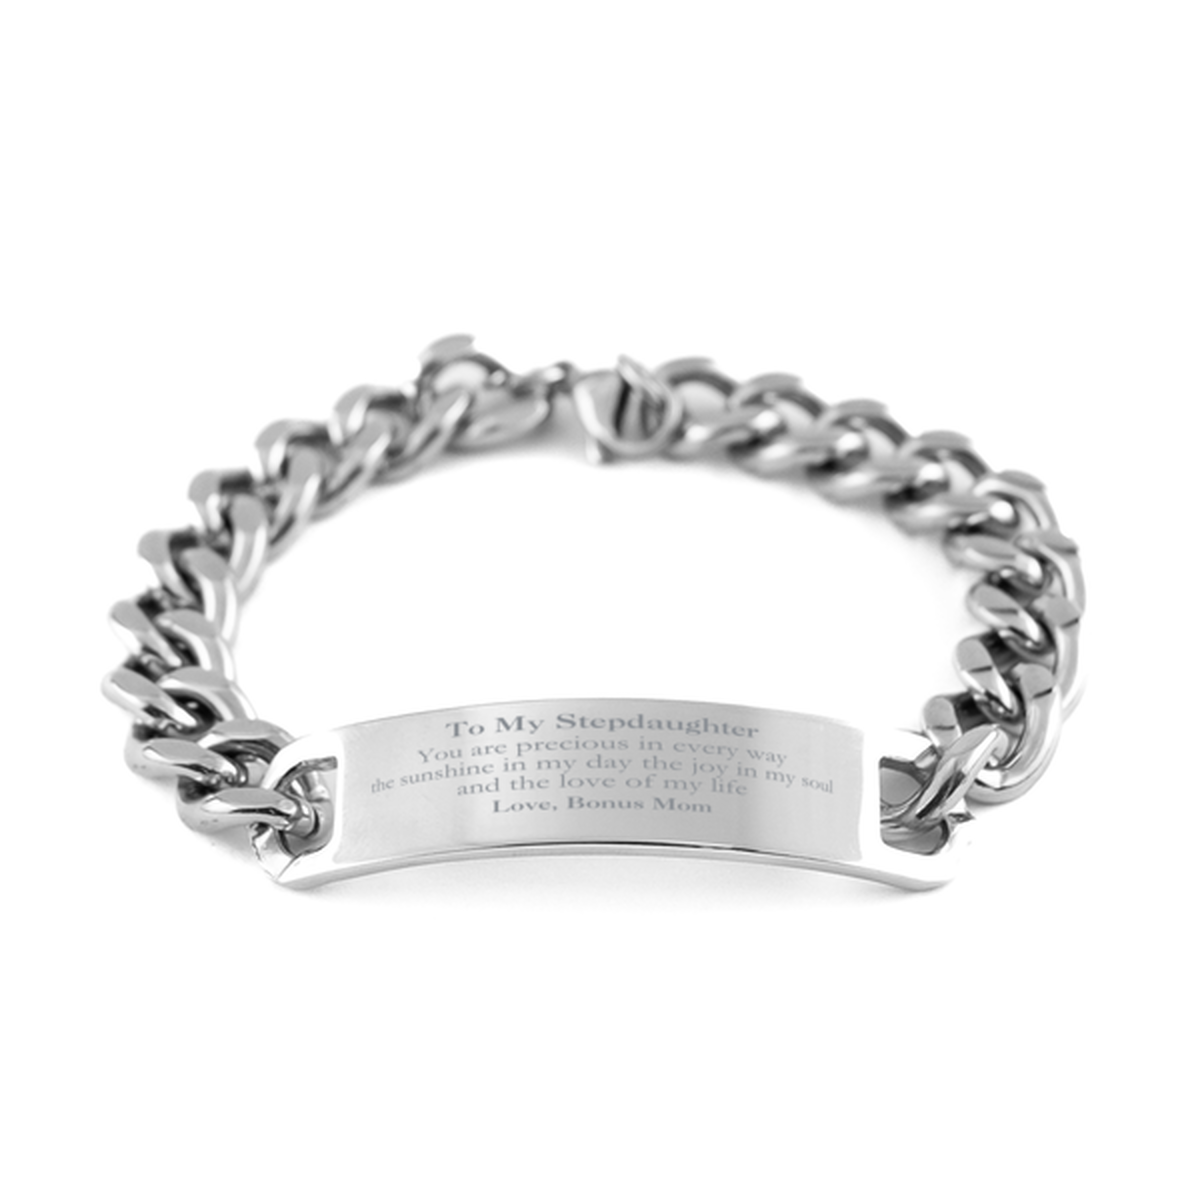 Graduation Gifts for Stepdaughter Cuban Chain Stainless Steel Bracelet Present from Bonus Mom, Christmas Stepdaughter Birthday Gifts Stepdaughter You are precious in every way the sunshine in my day. Love, Bonus Mom